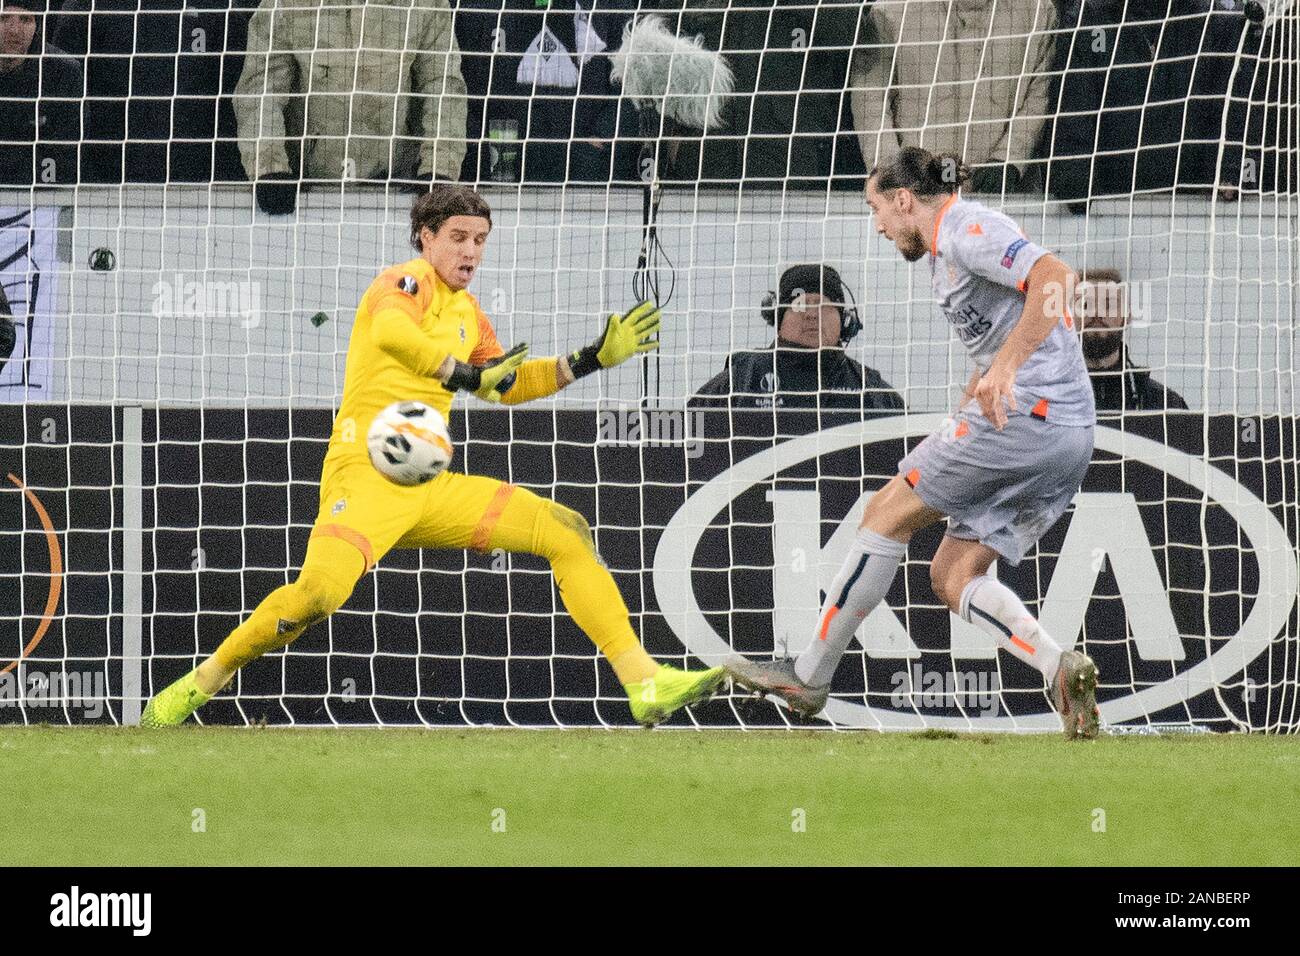 Enzo CRIVELLI (Basak, r.) Scores the decisive goal for the 2-1 versus goalwart Yann SOMMER (MG) shortly before the end of the game; Soccer Europa League, group stage, group J, matchday 6, Borussia Monchengladbach (MG) - Istanbul Basaksehir FK (Basak) 1: 2, on 12.12.2019 in Borussia Monchengladbach/Germany. | usage worldwide Stock Photo